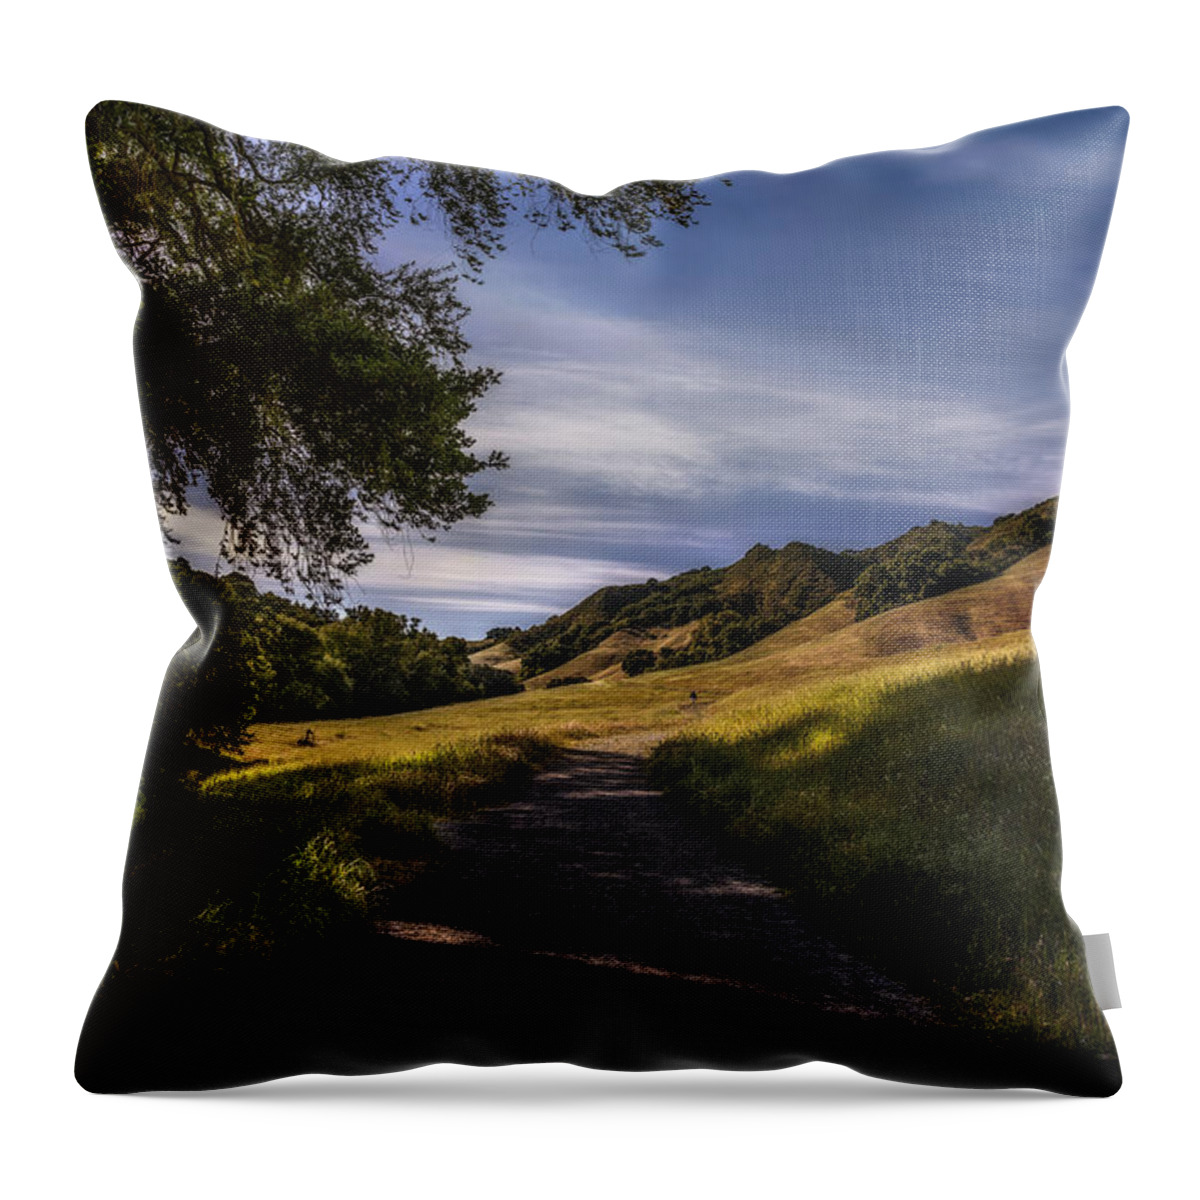 Trampas Throw Pillow featuring the photograph Solitude #2 by Don Hoekwater Photography